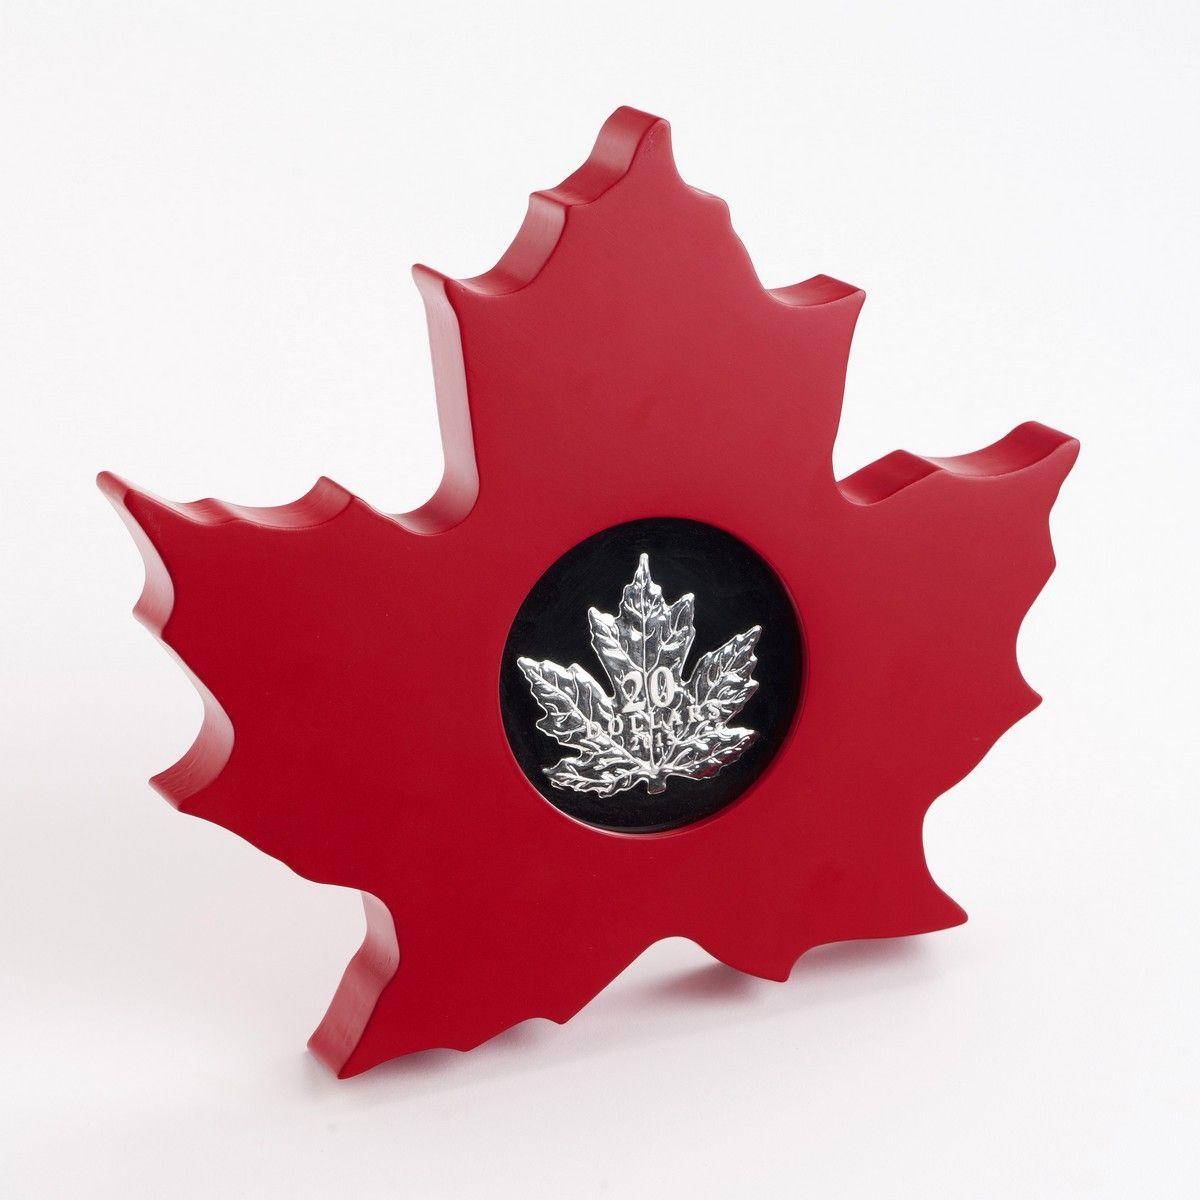 Canadian Maple Leaf Logo - 2015 $20 The Canadian Maple Leaf - Pure Silver Coin